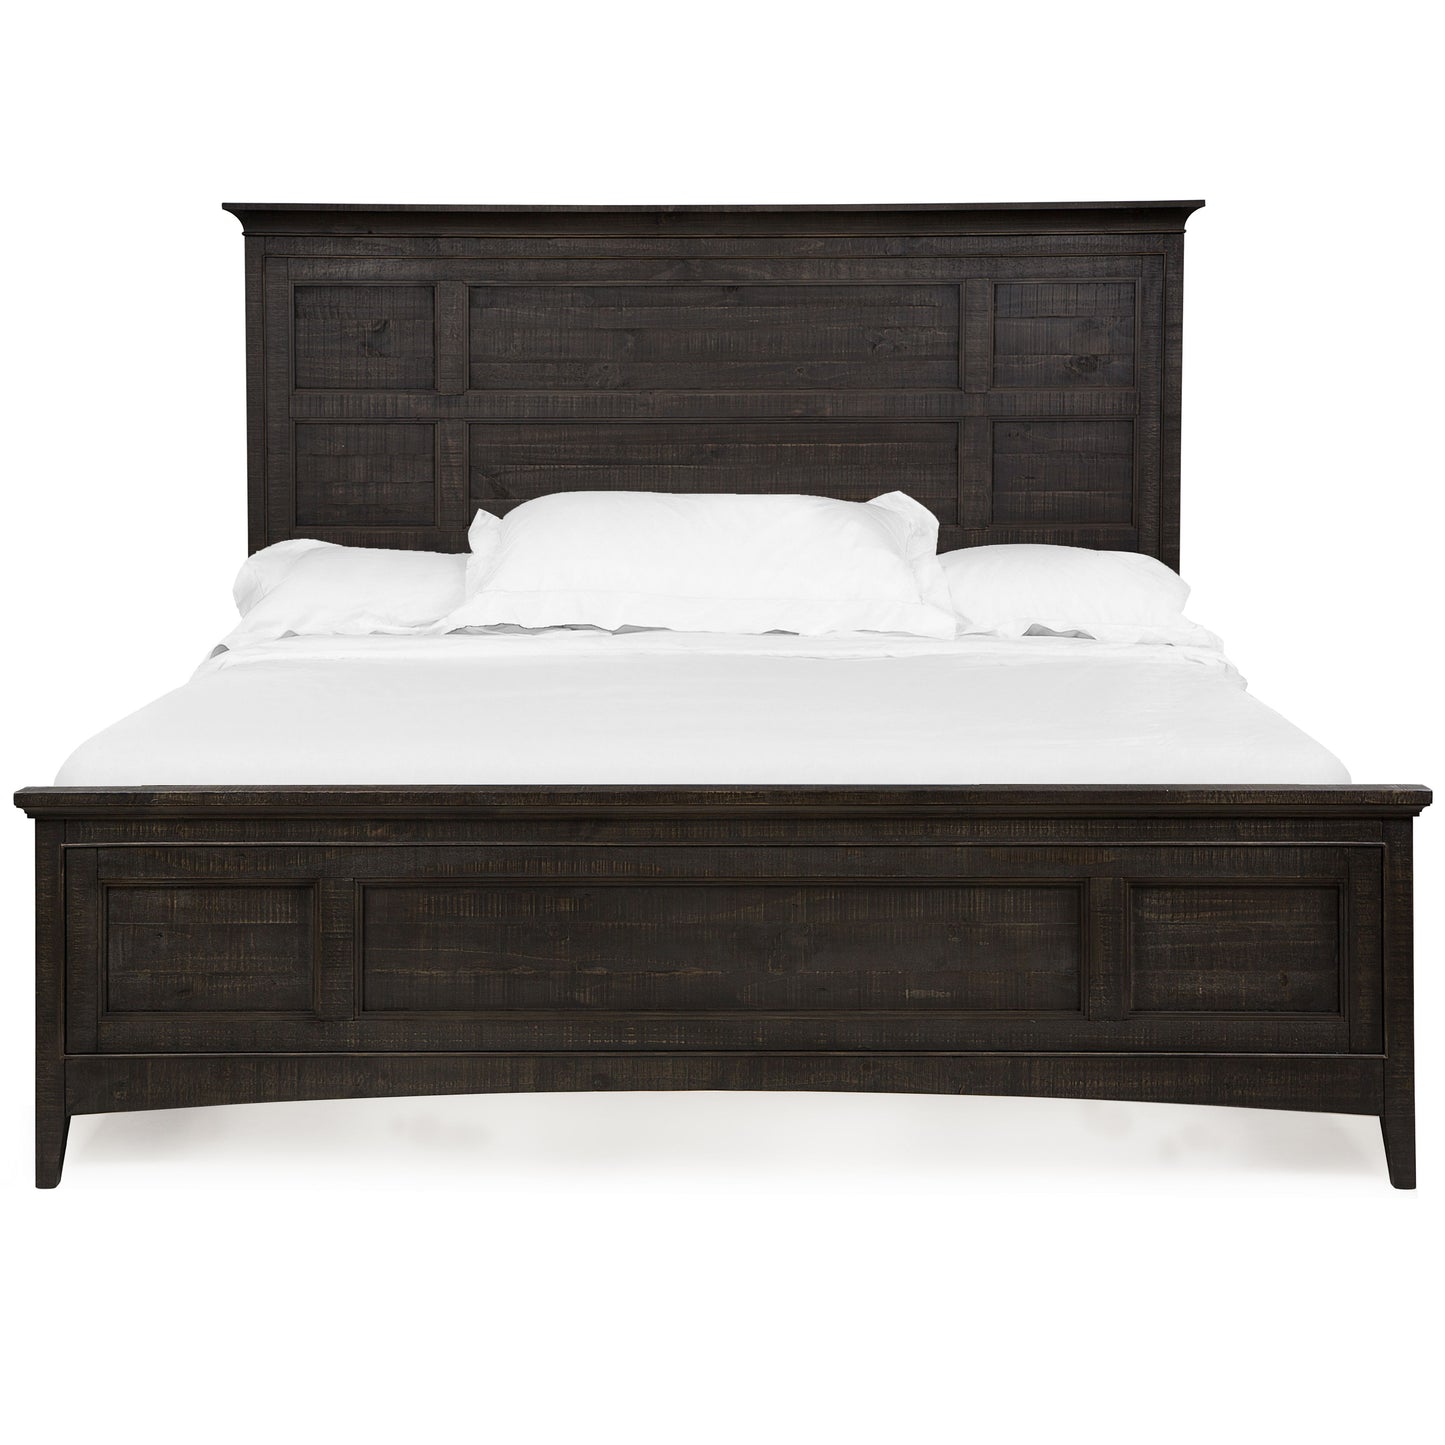 Westley Falls - Complete Panel Bed With Storage Rails